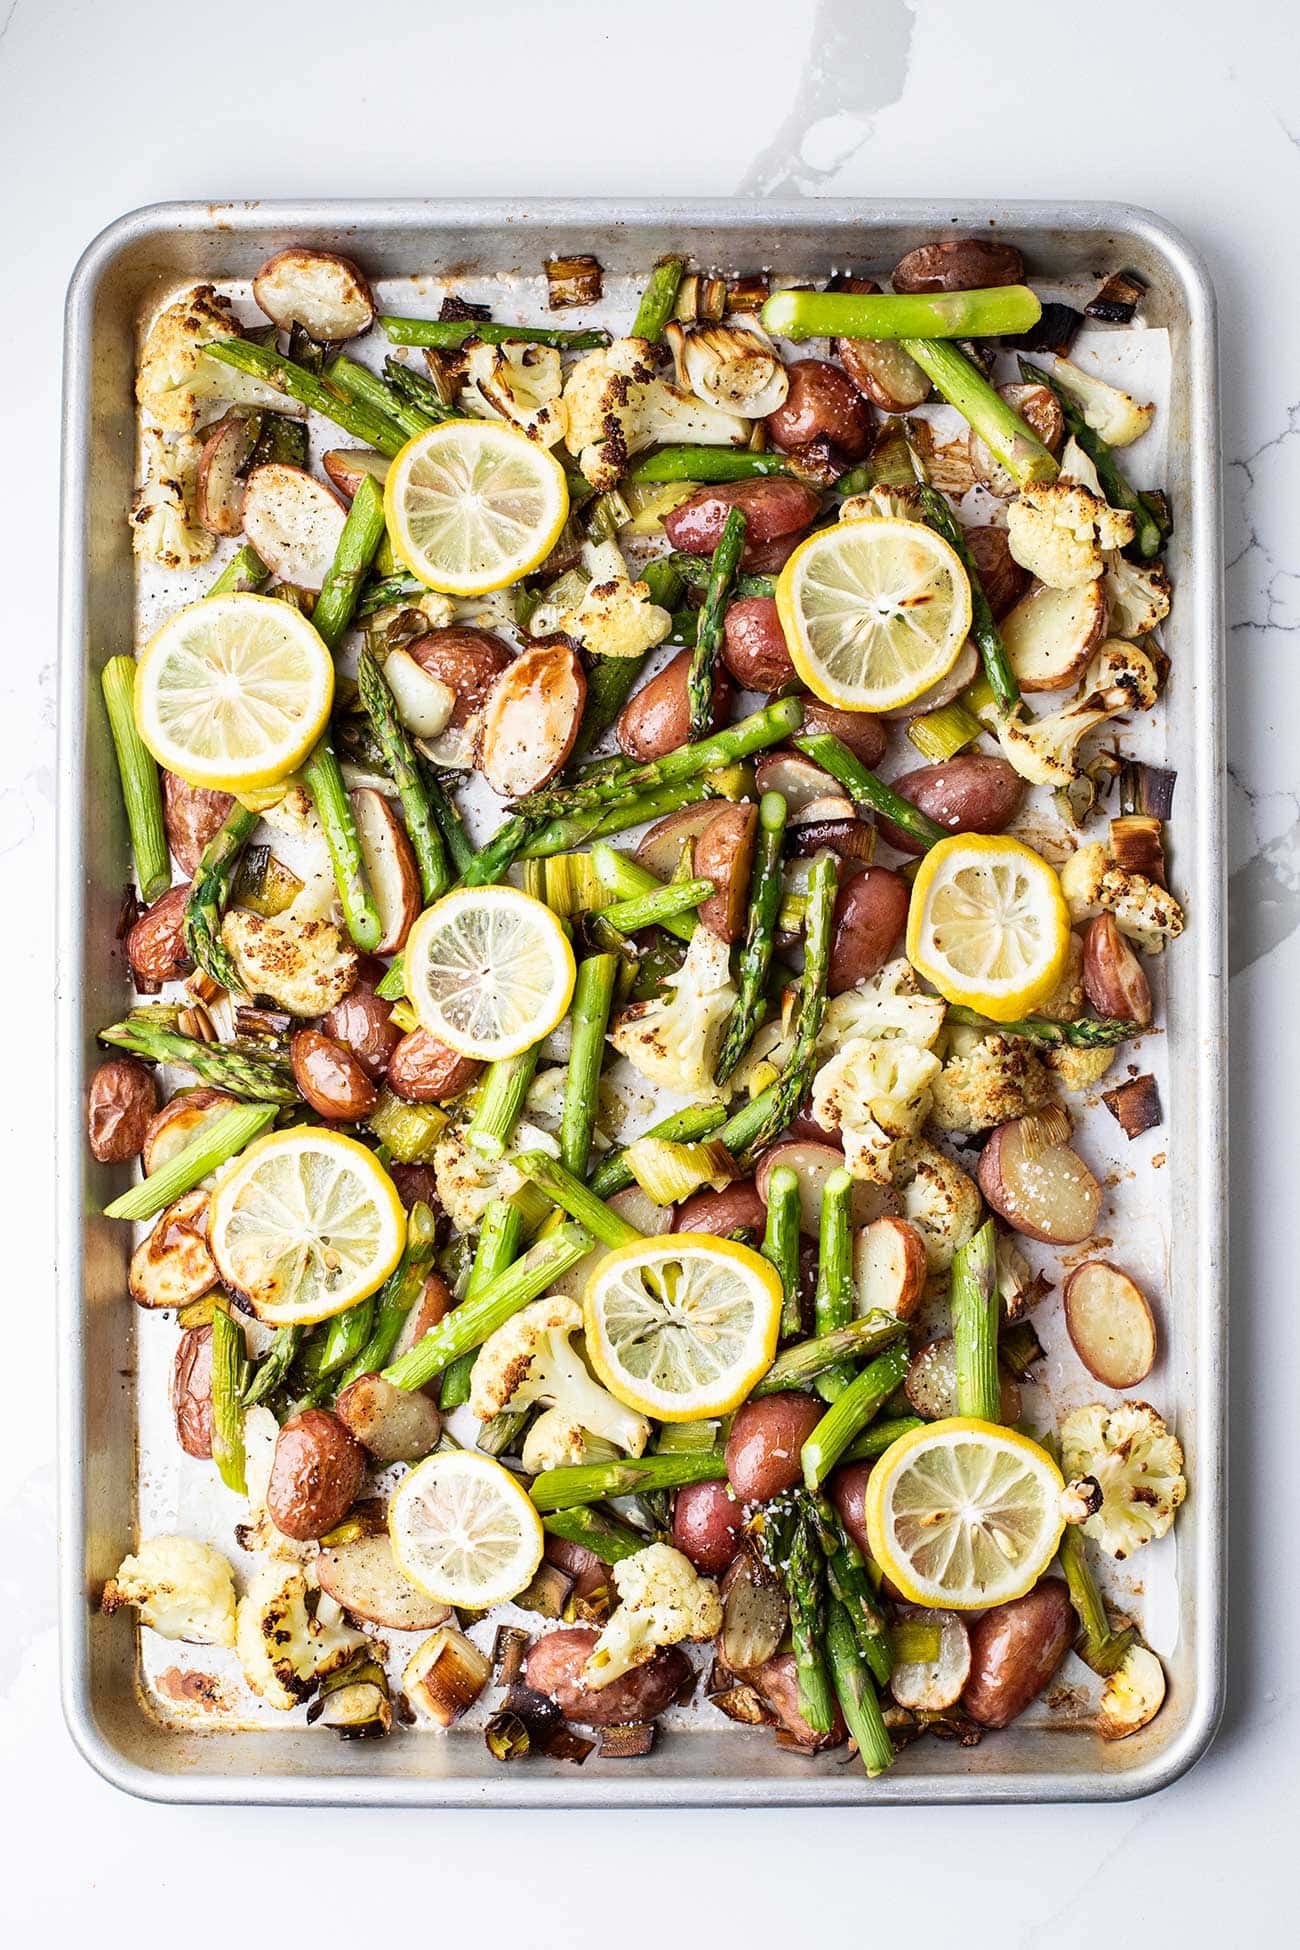 A sheet pan showing roasted vegetables topped with lemon slices.